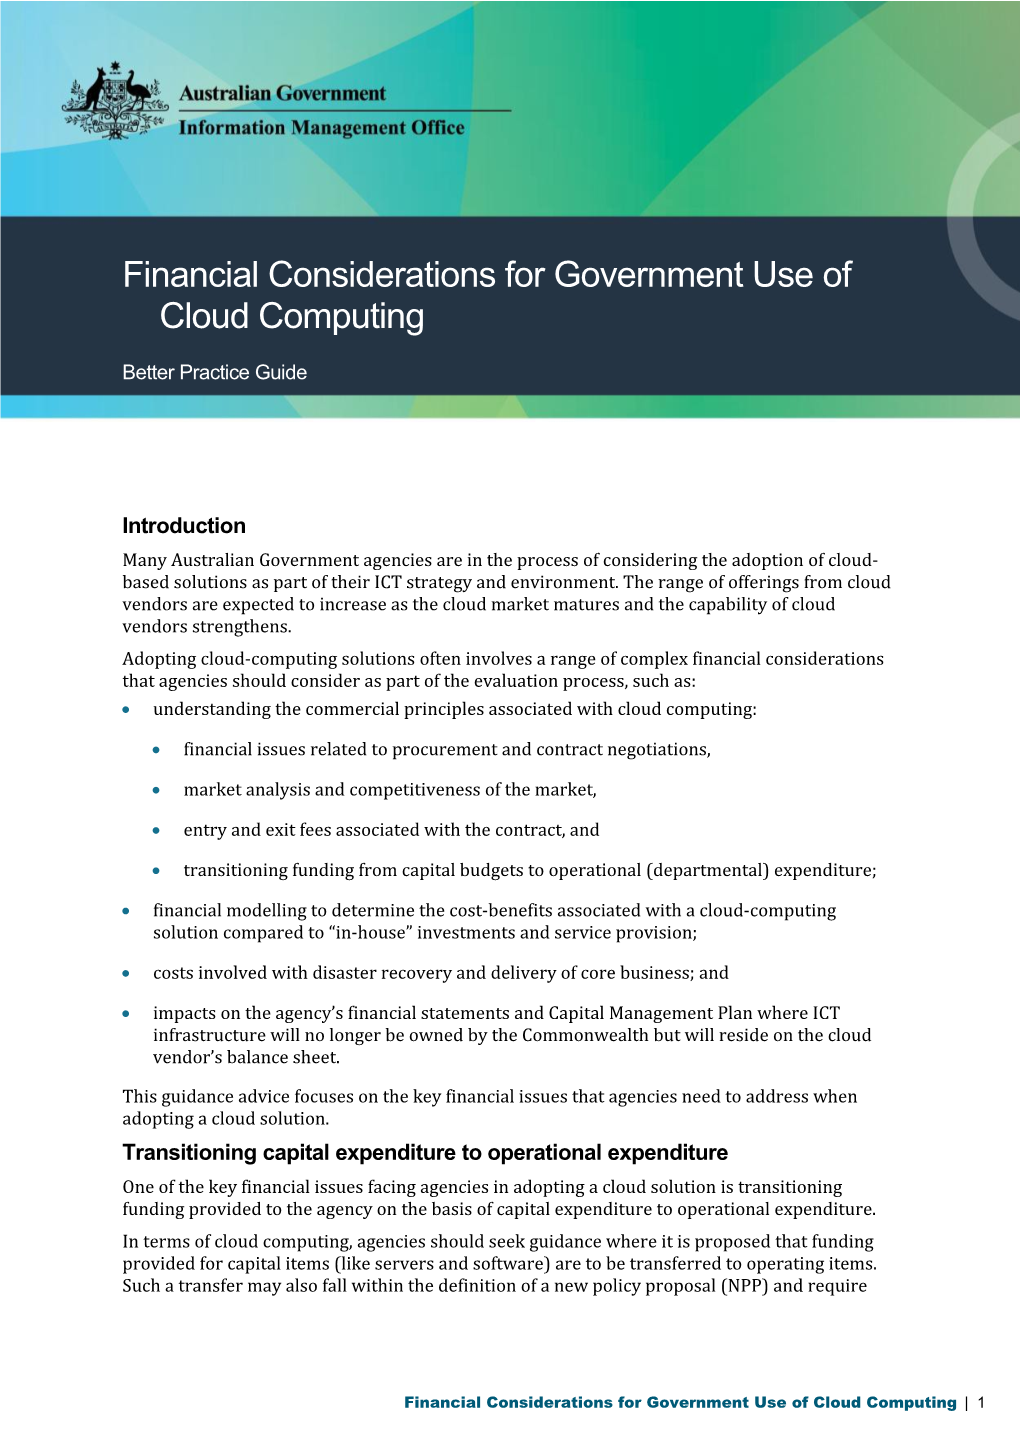 Financial Considerations for Cloud Computing